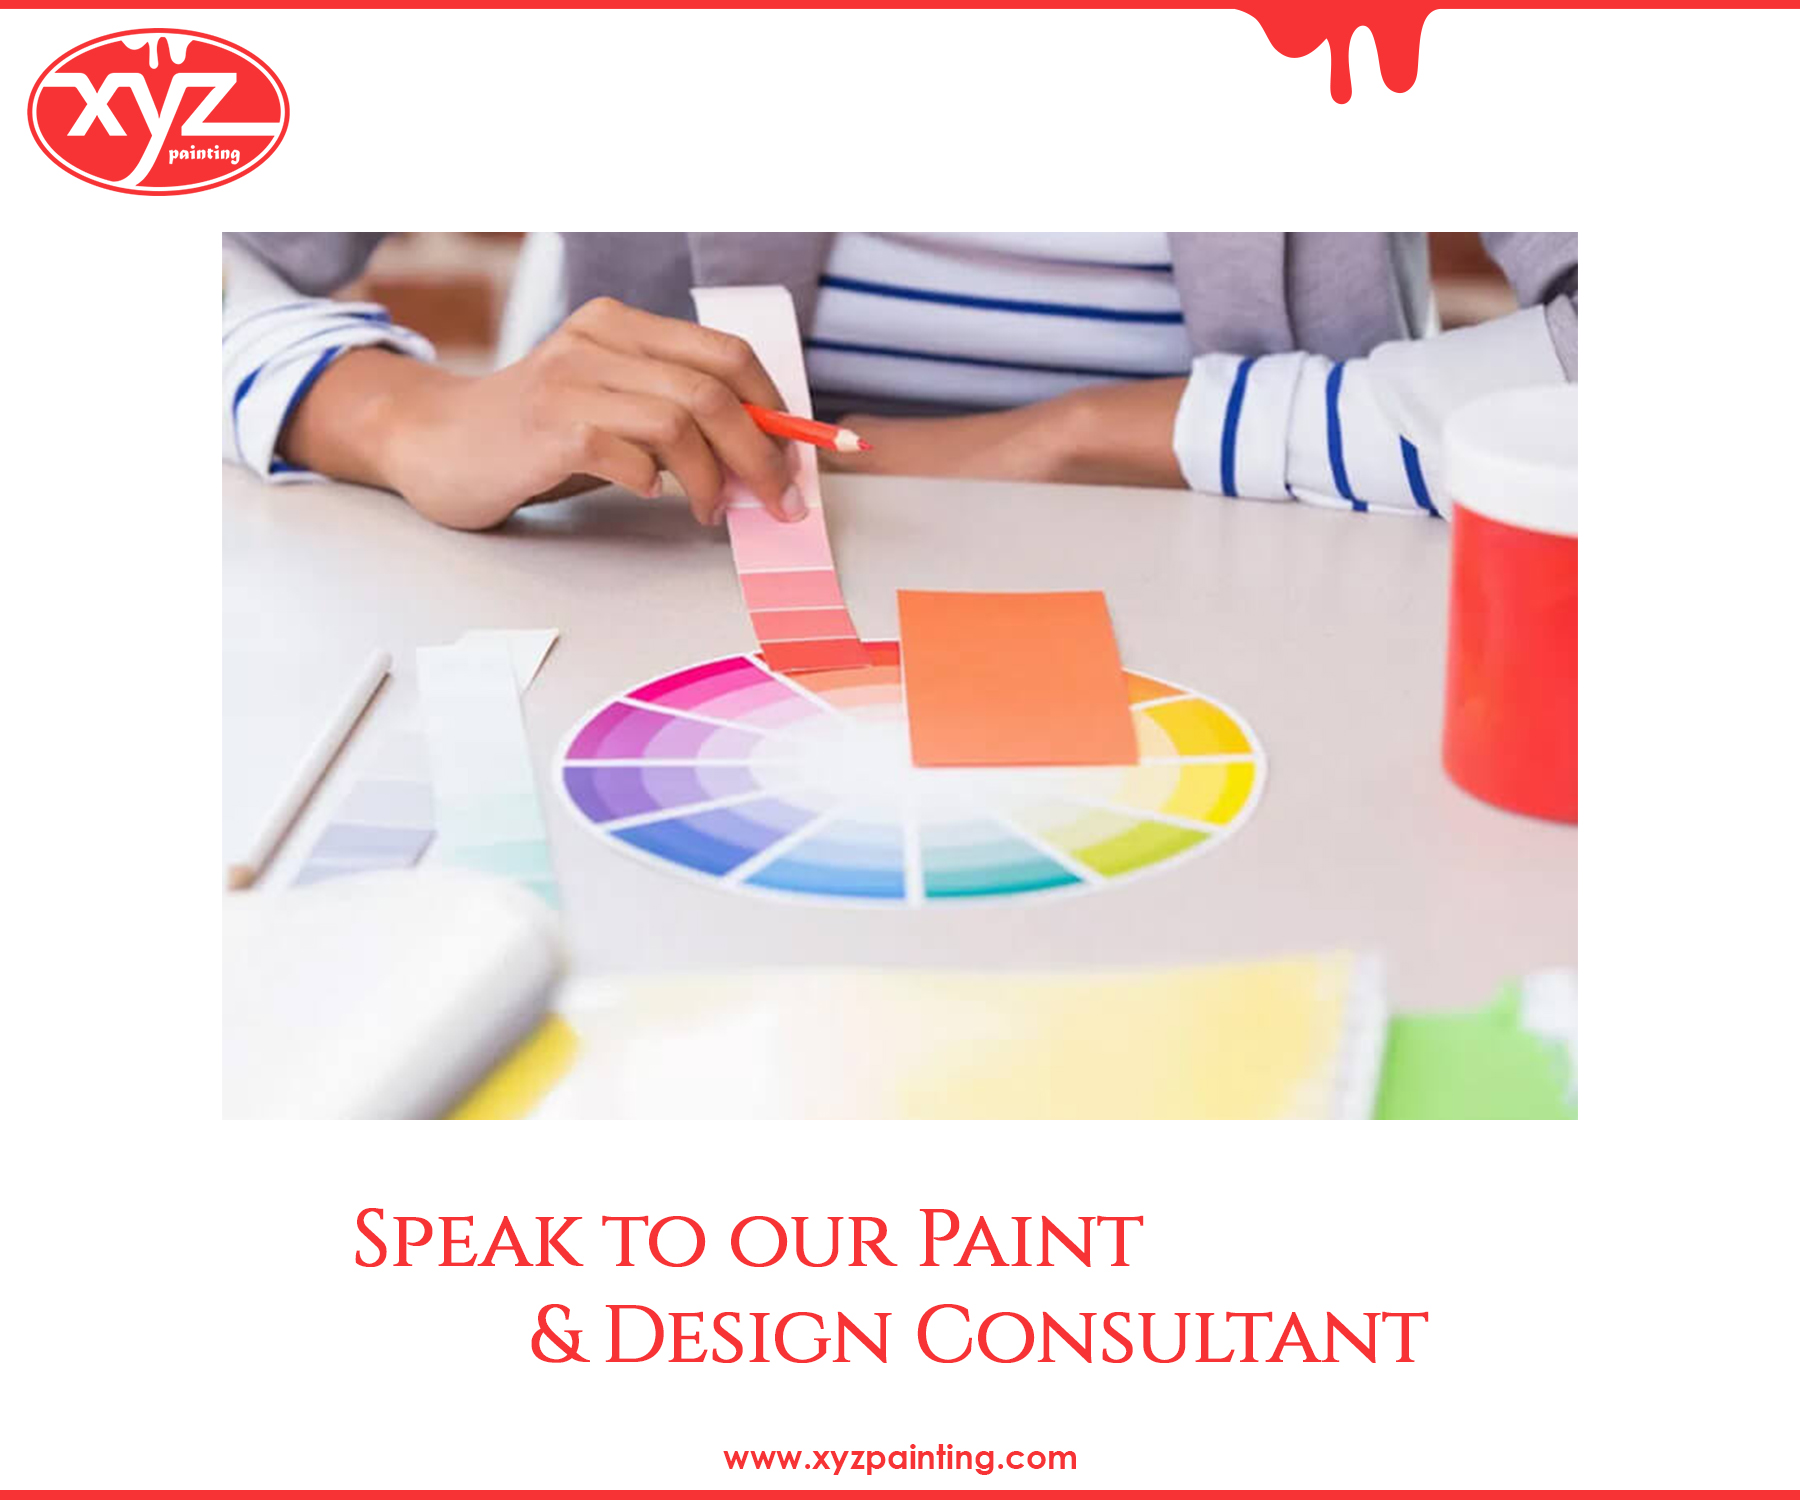 Painting Services In Vancouver - XYZ Painting